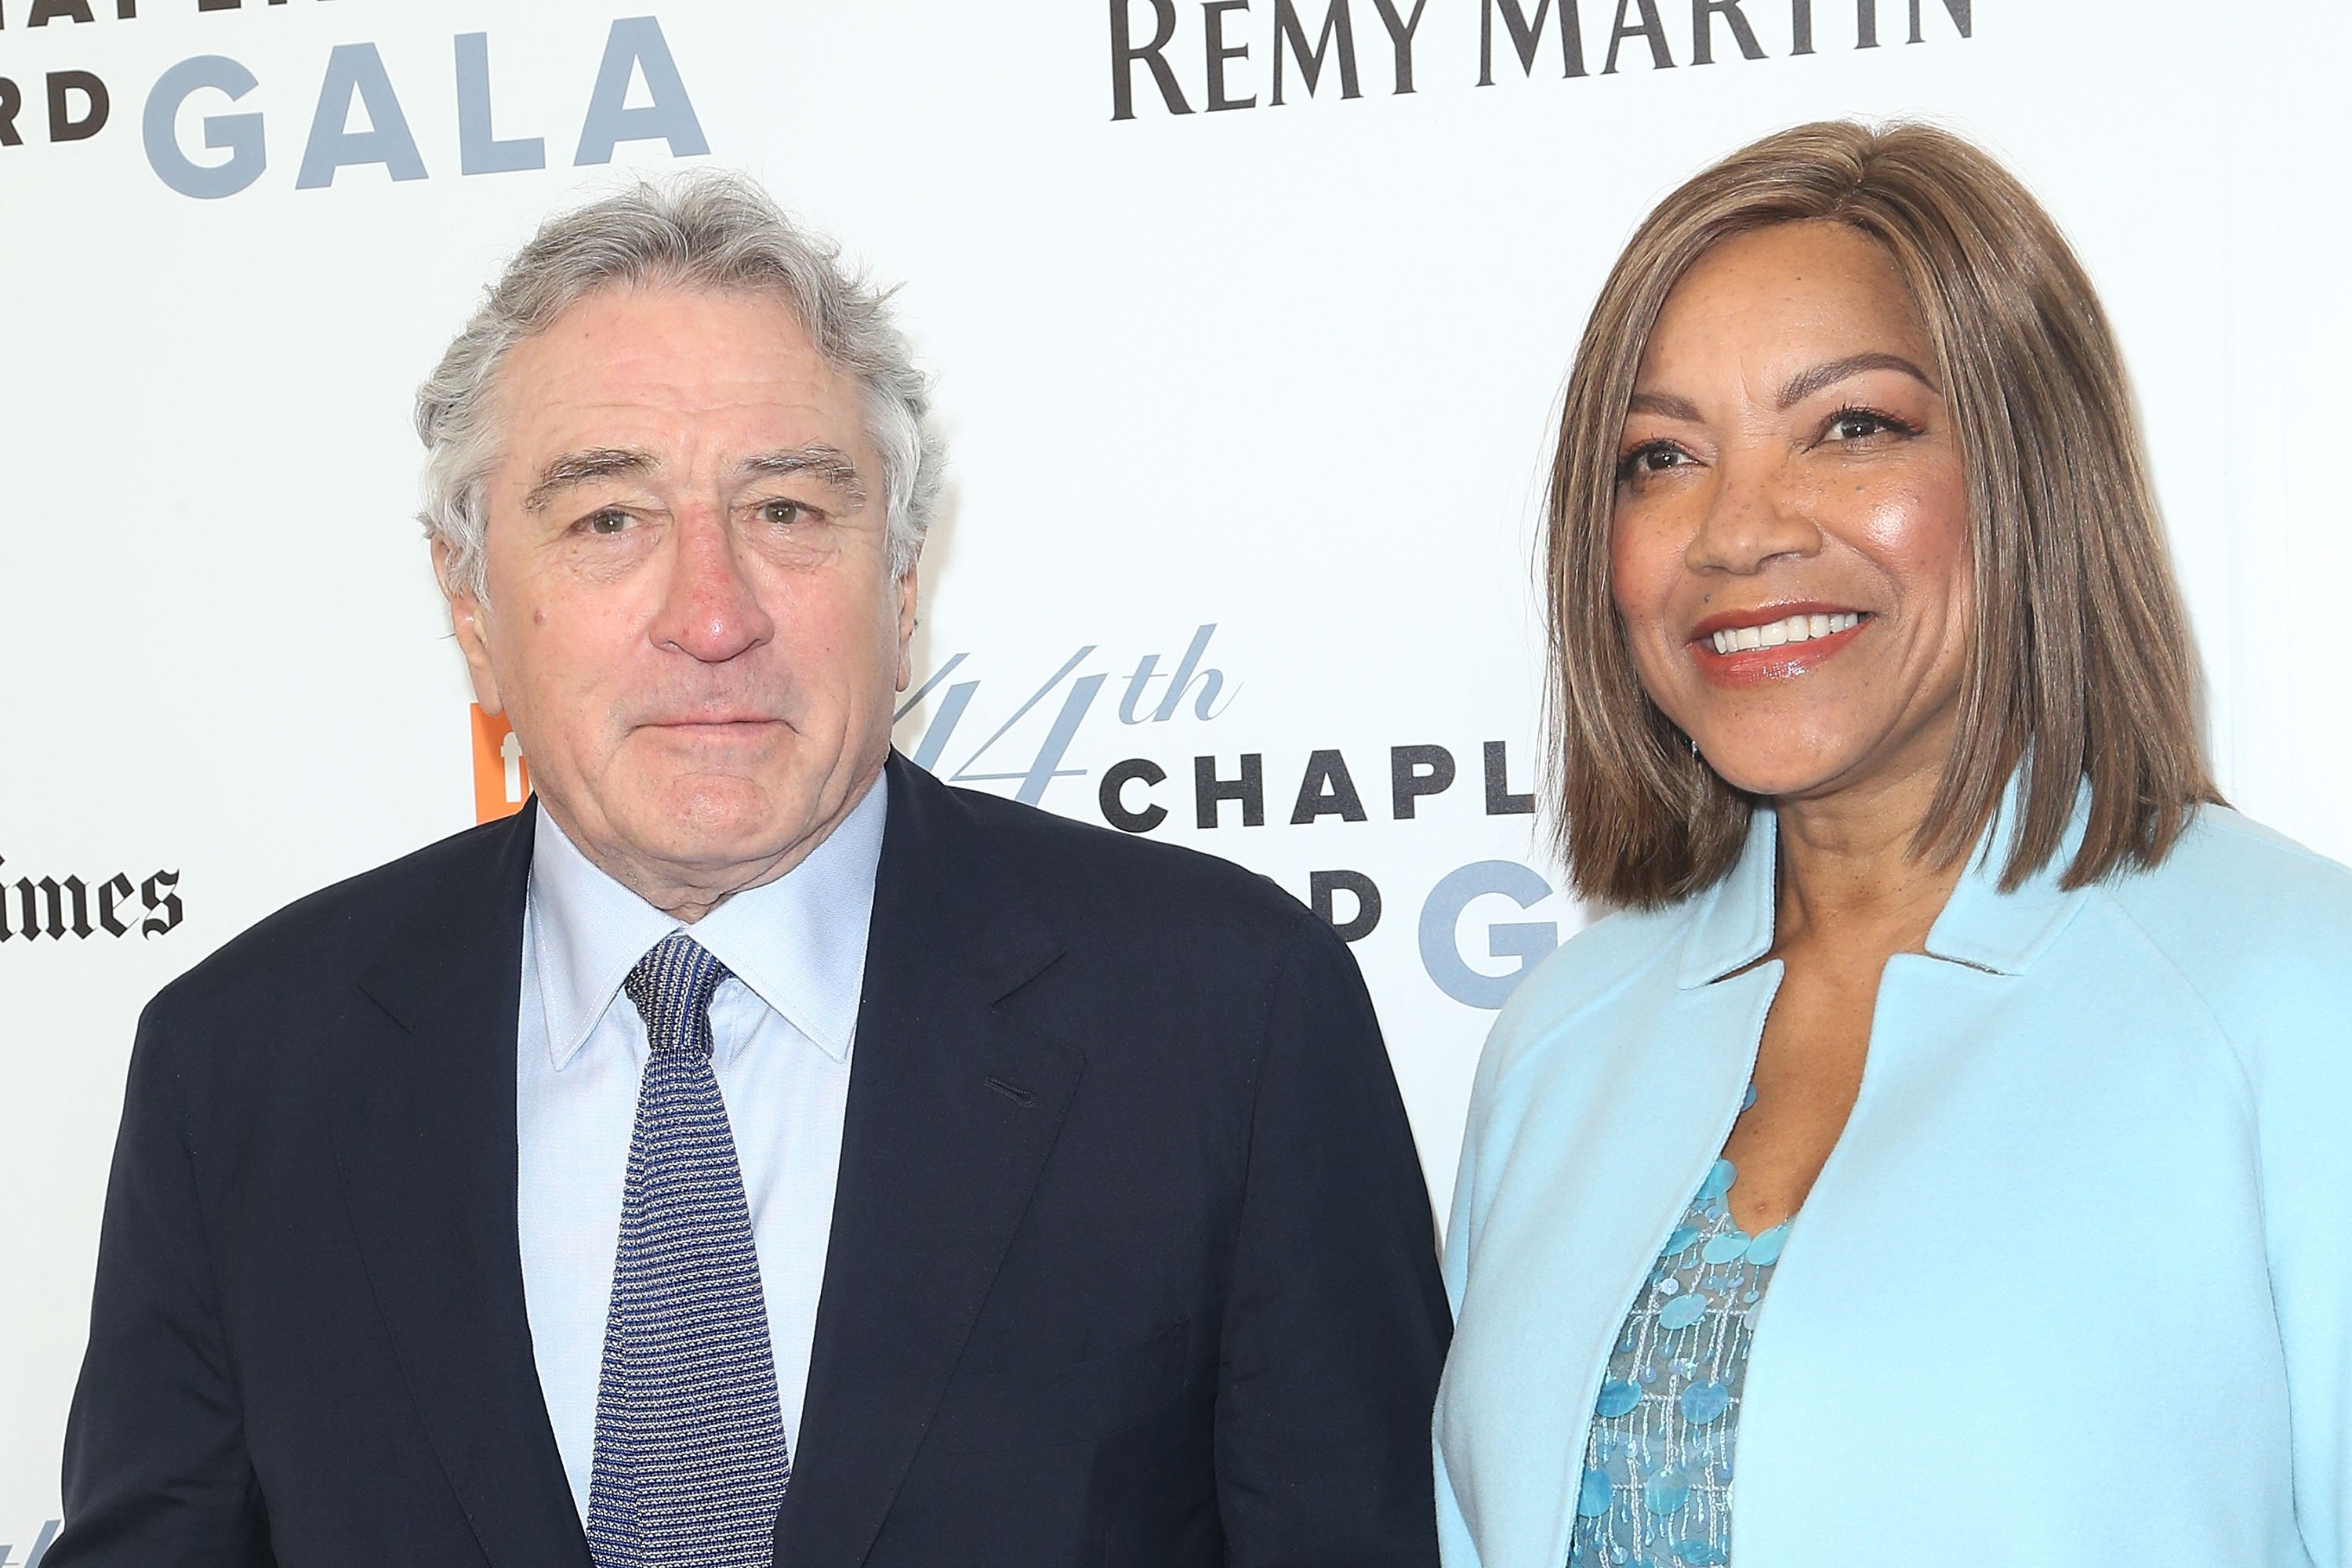 Robert De Niro and Grace Hightower attending the 44th Chaplin Award Gala at David Koch Theatre Lincoln Center on May 8, 2017 in New York City. | Source: Getty Images